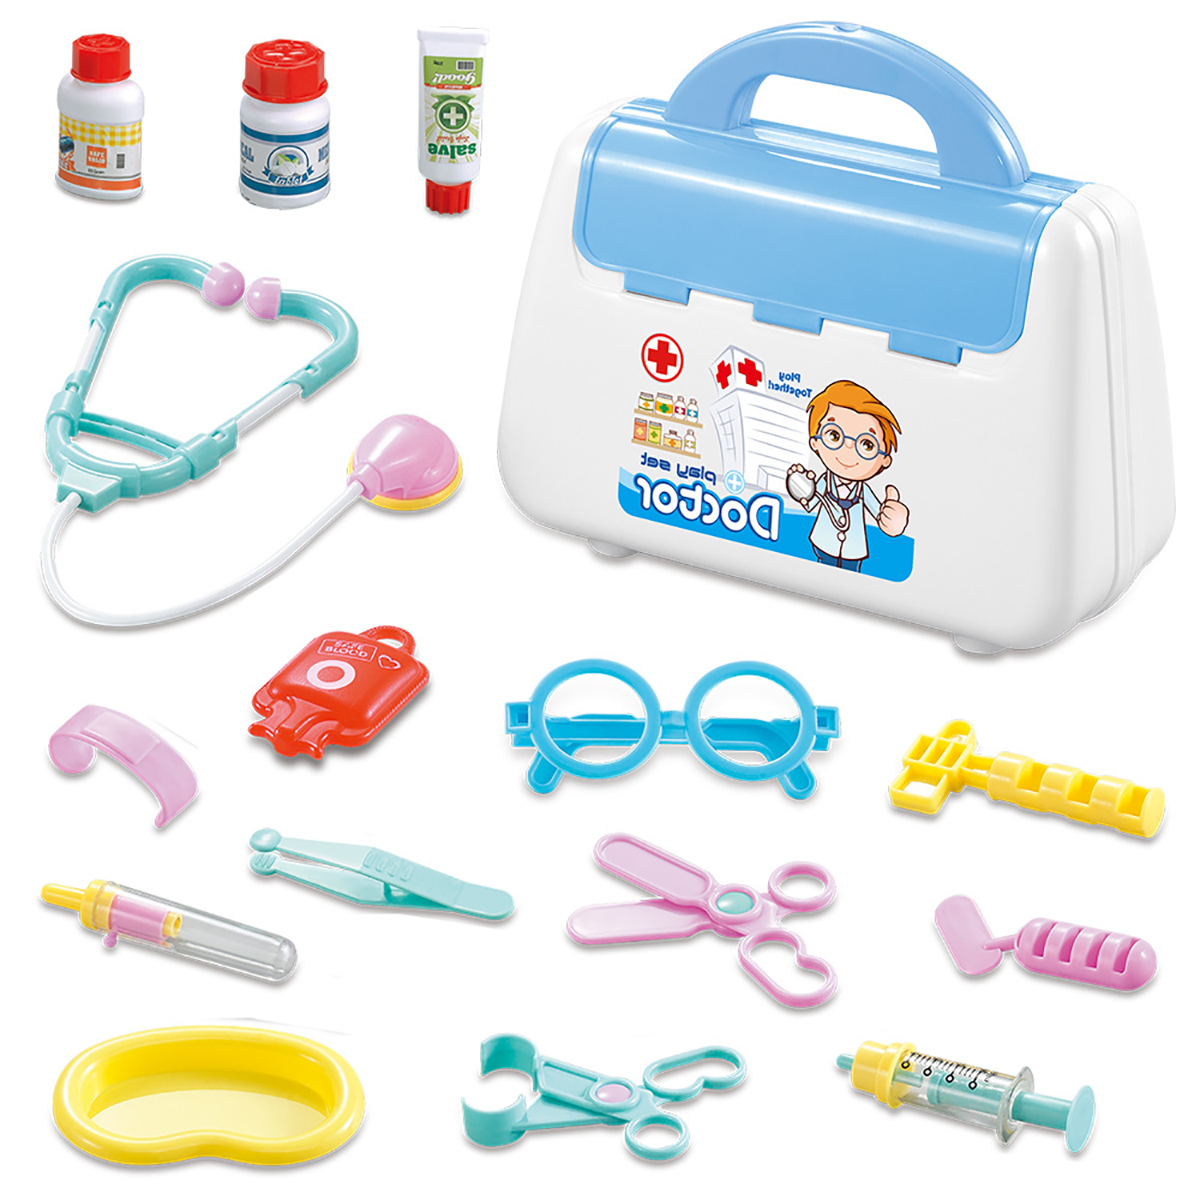 Simulation-Pretend-Doctor-Nurse-Role-Play-Education-Toy-Set-with-Carrying-Box-for-Kids-Gift-1725291-8